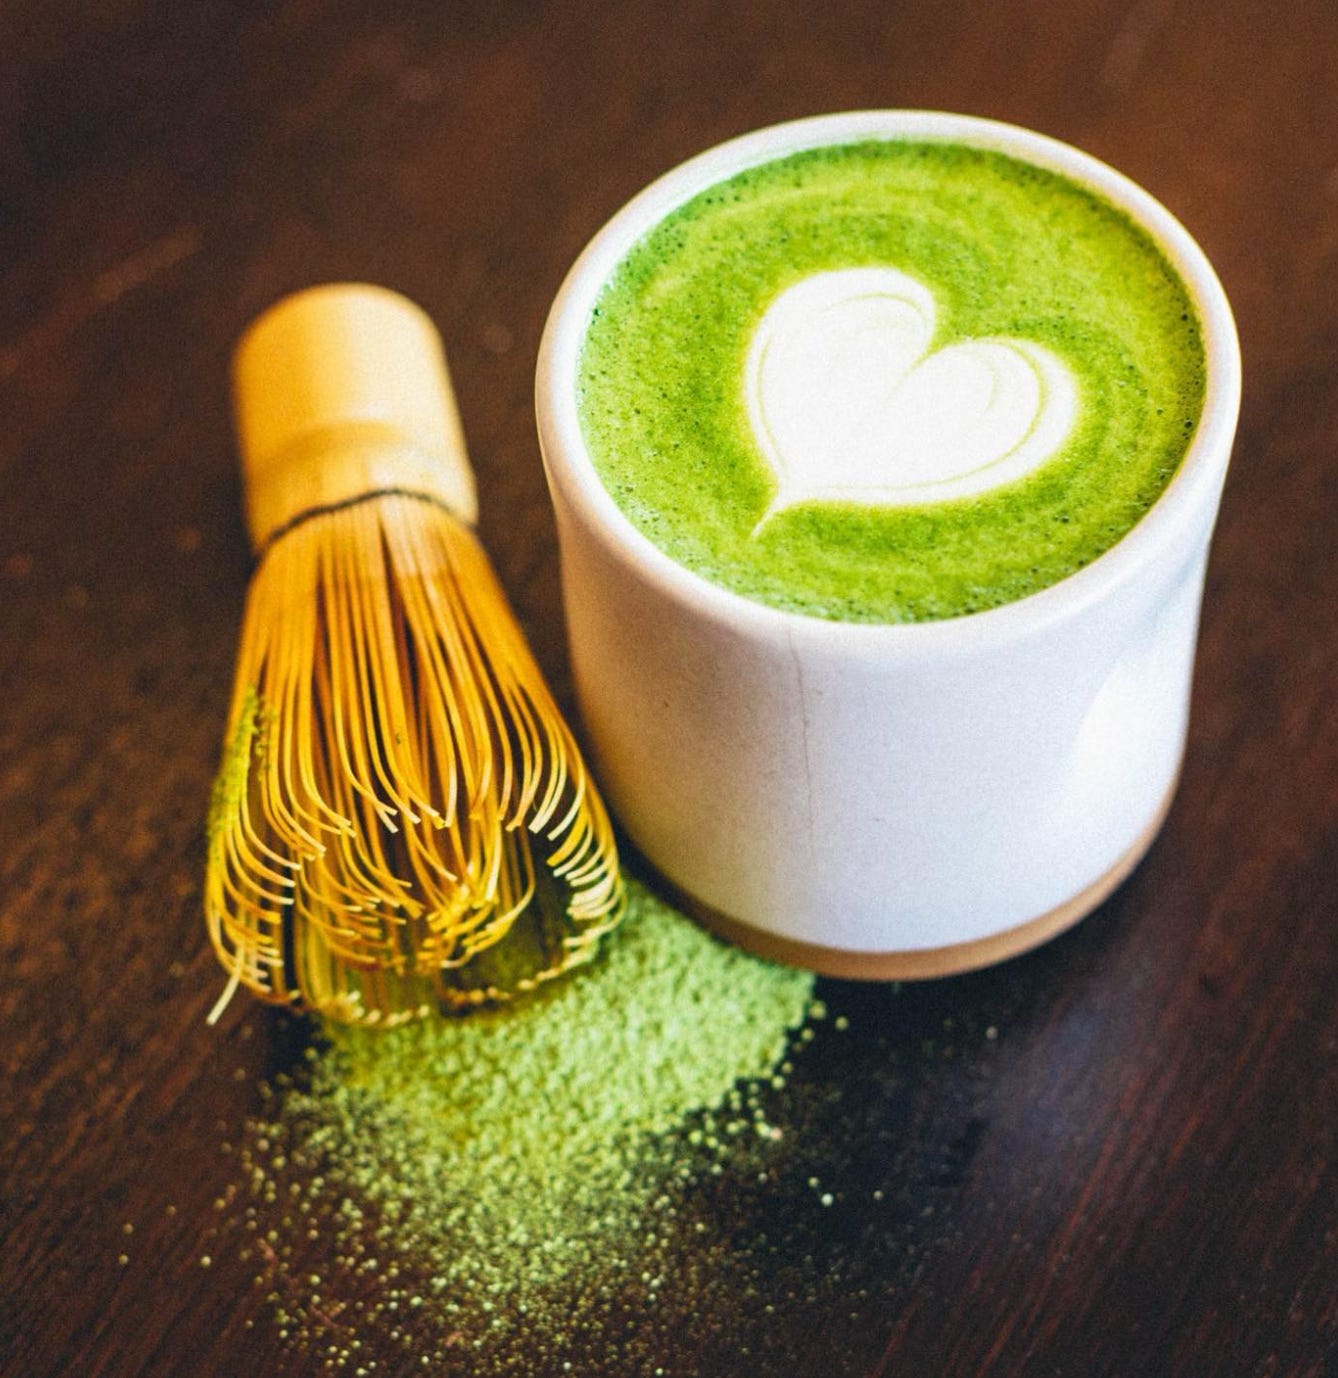 A top view of a matcha green tea latte with a white heart latte art in the top. Drink is in a white ceramic cup with ground matcha tea sprinkled on a brown wooden table top.